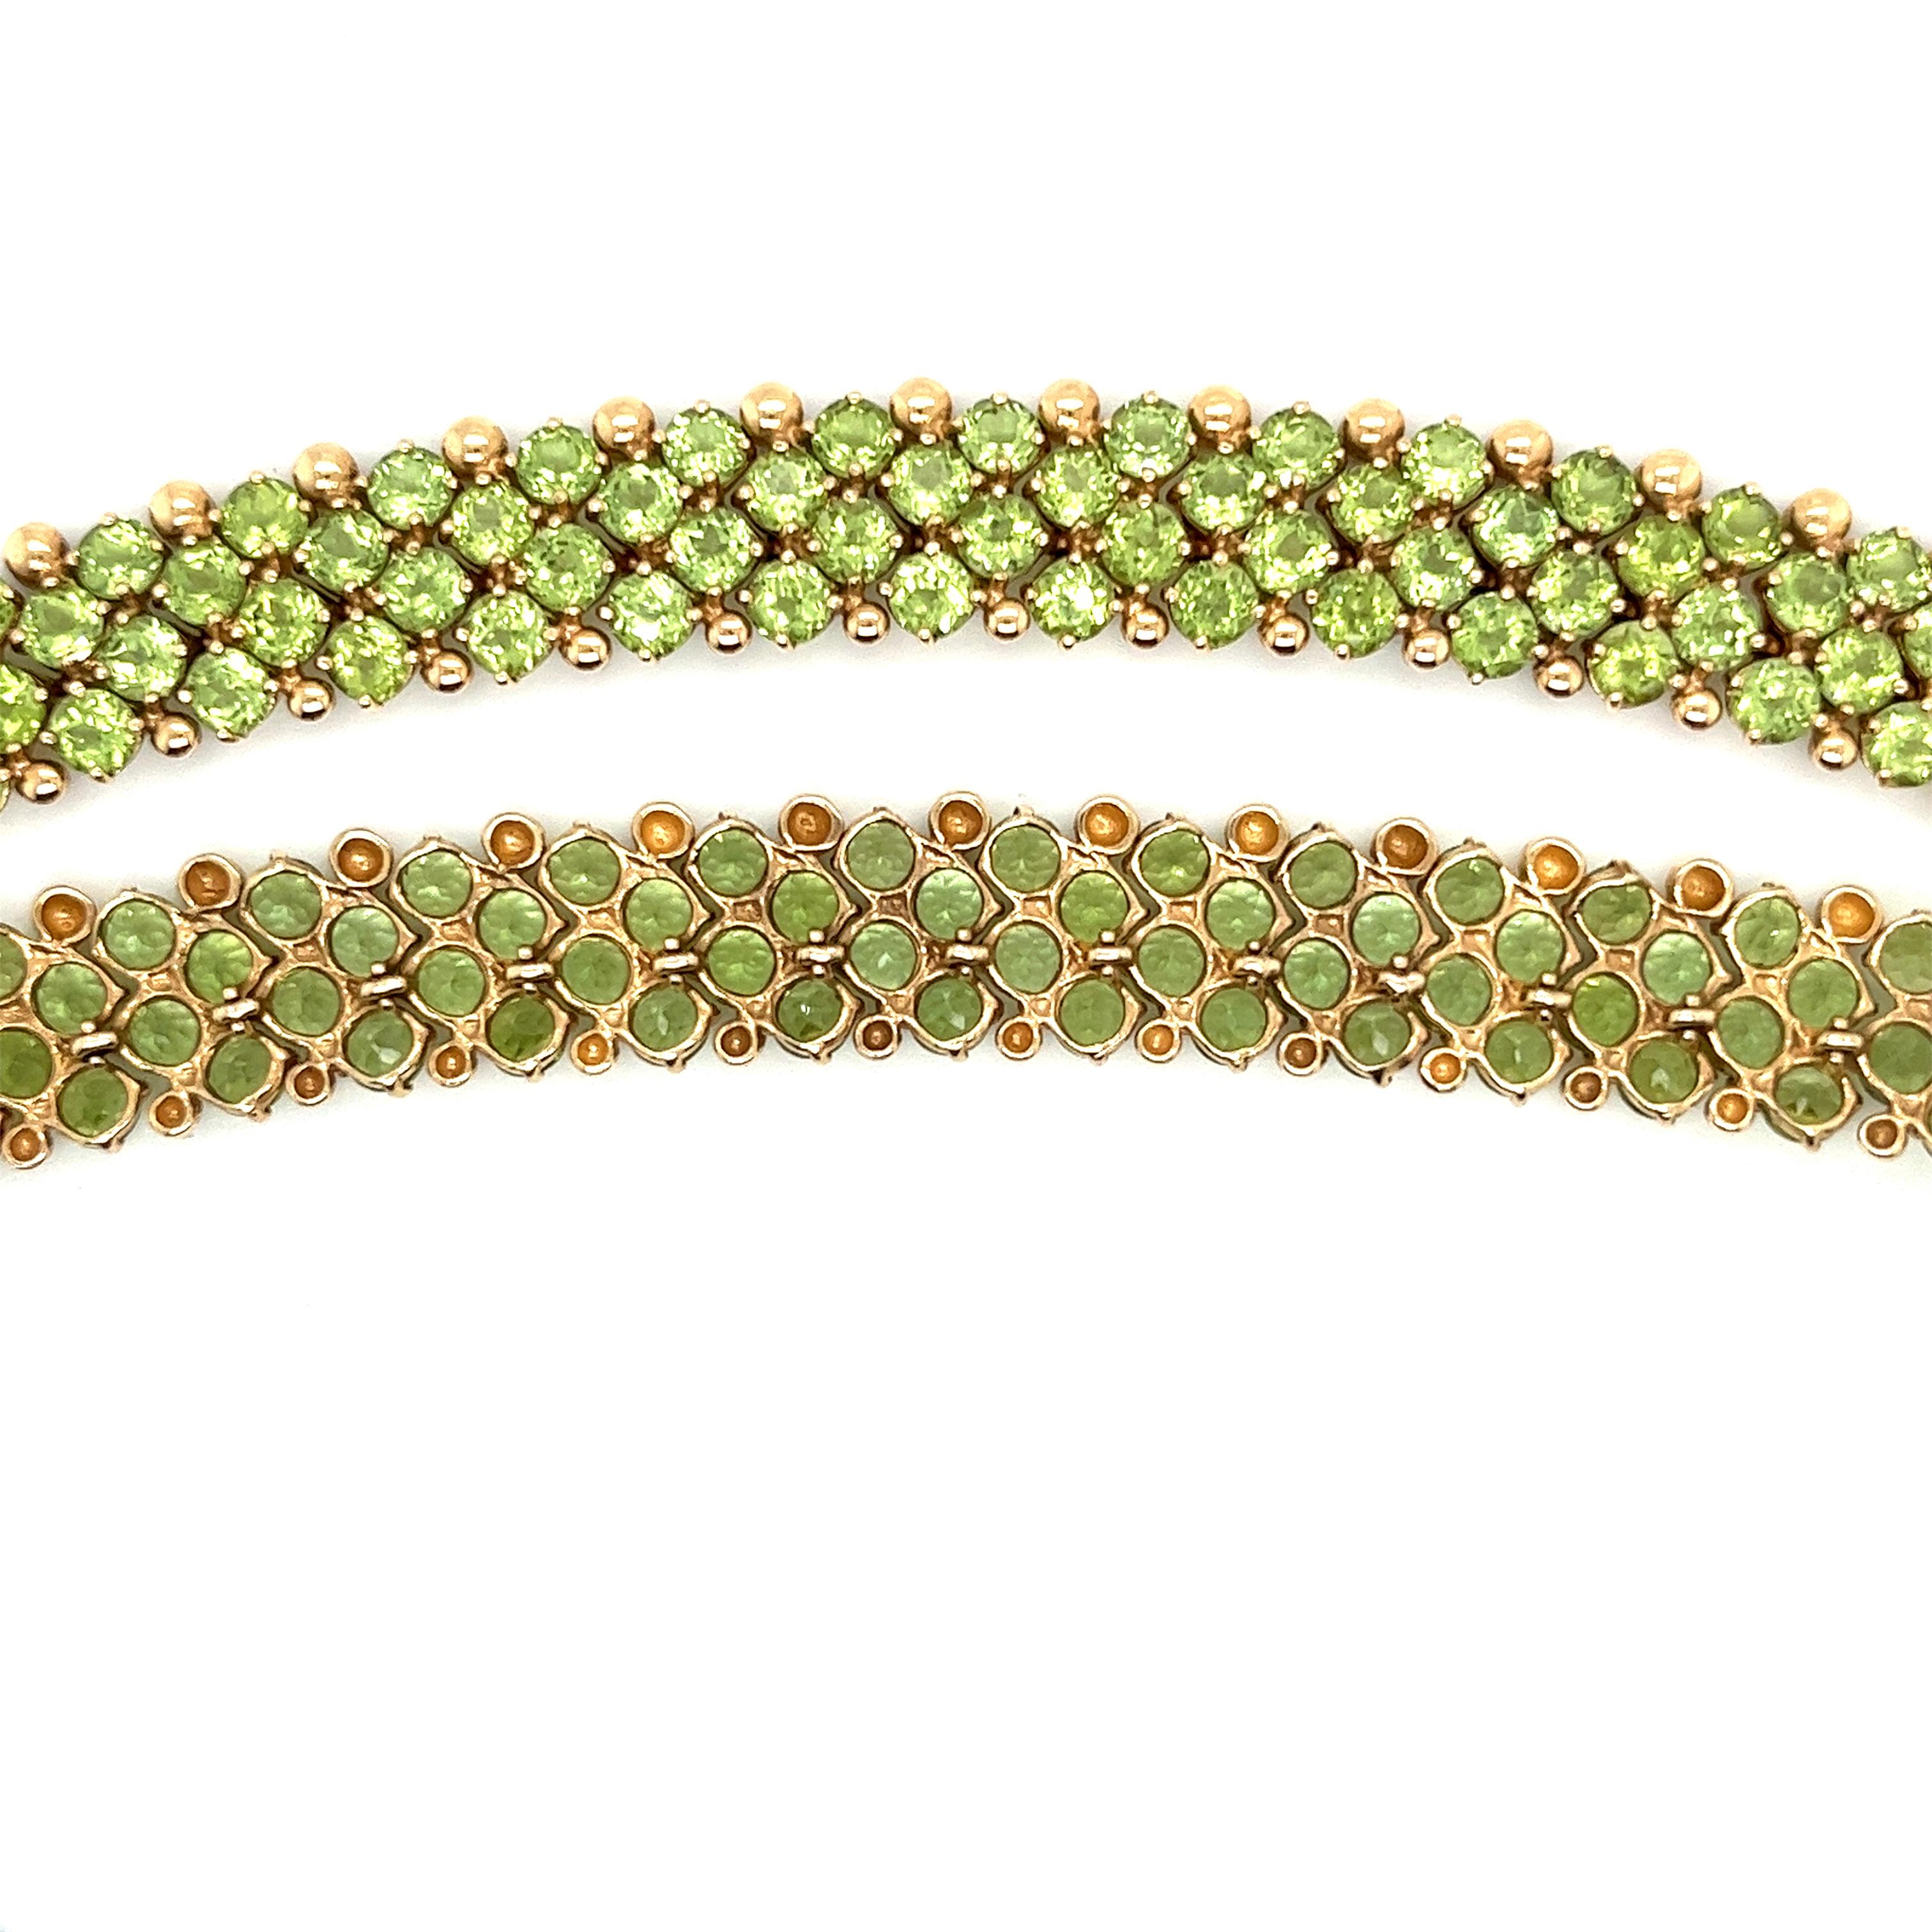 Modern 45 Carat Mixed Cut Green Peridot Cluster Choker Necklace in 14K Yellow Gold For Sale